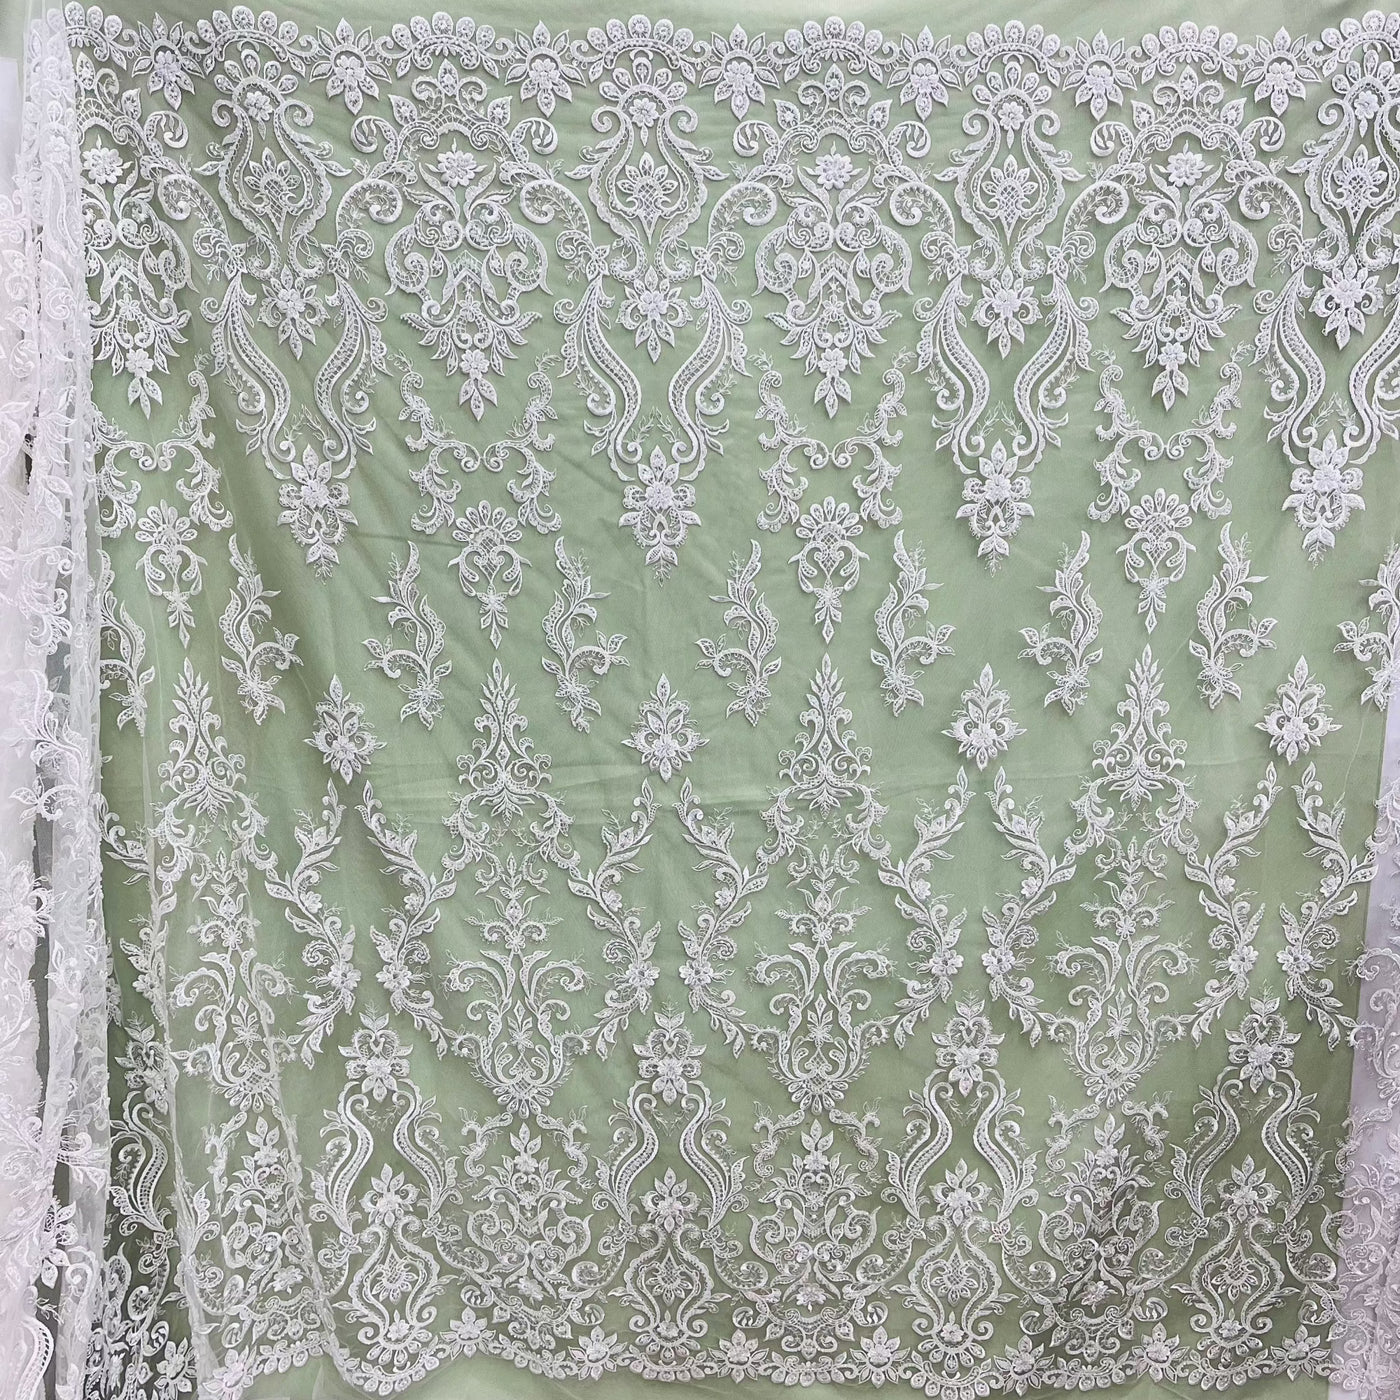 Beaded & Sequined Lace Fabric Embroidered on 100% Polyester Net Mesh | Lace USA - GD-12156 Ivory